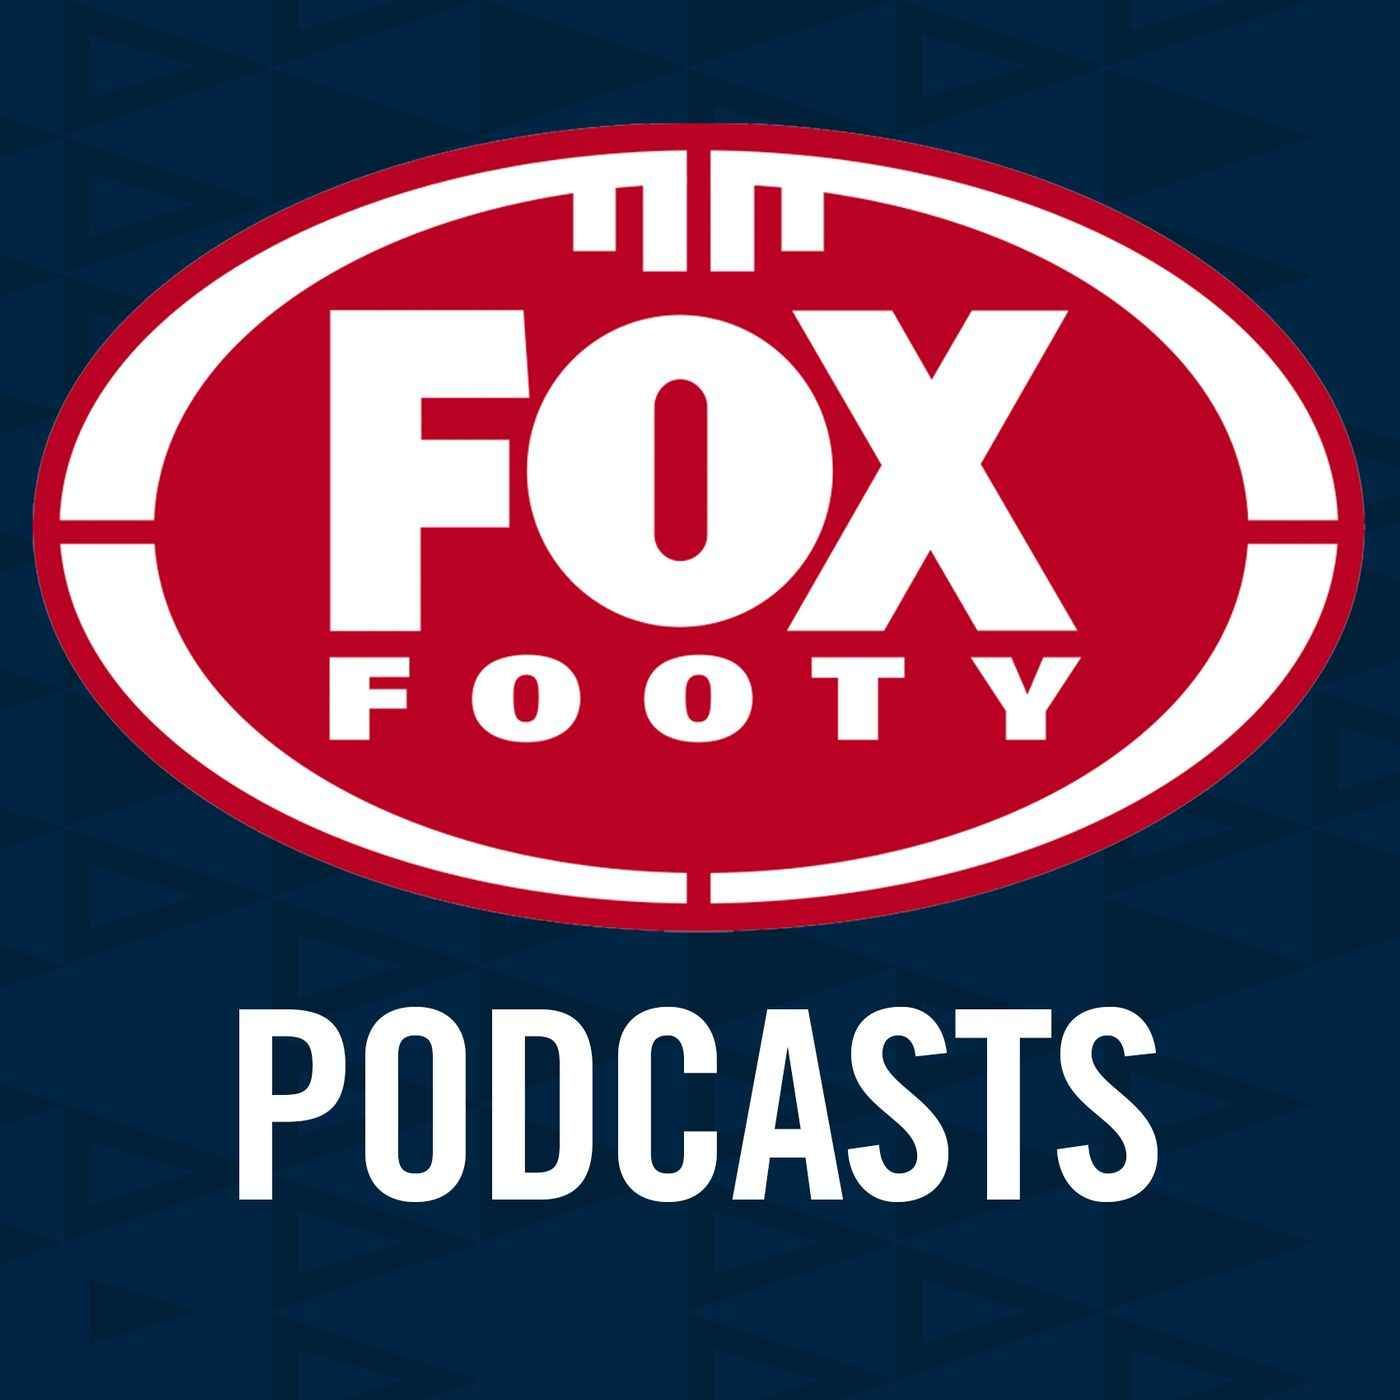 Fox Footy Live: manager Tom Petroro on what the next steps will be for the players and coaches